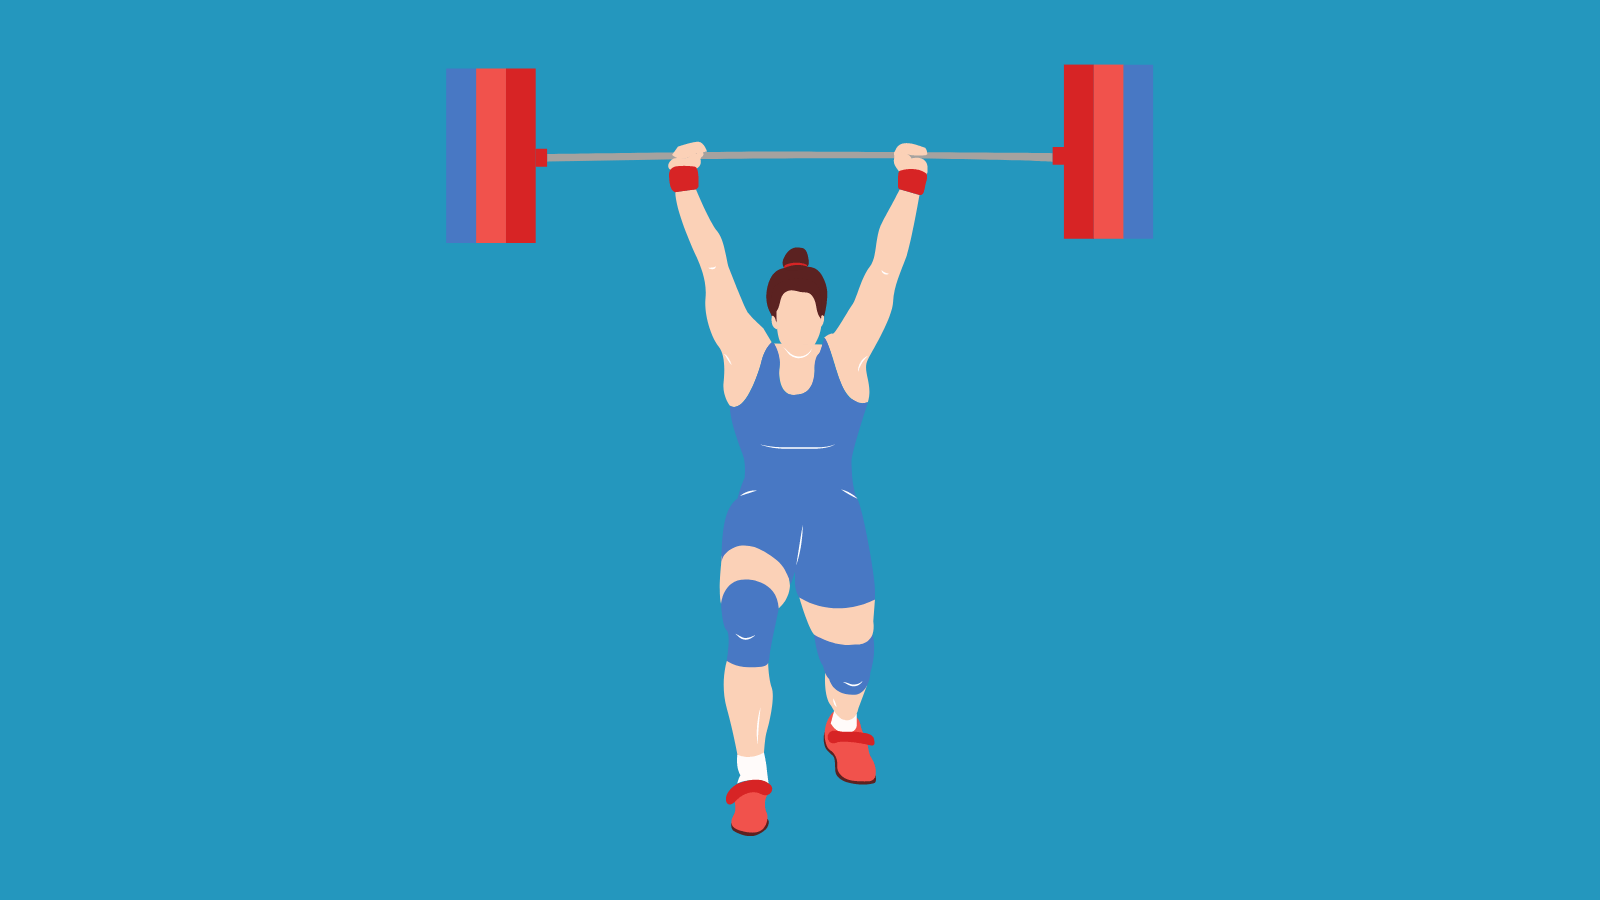 An illustration of a power lifter